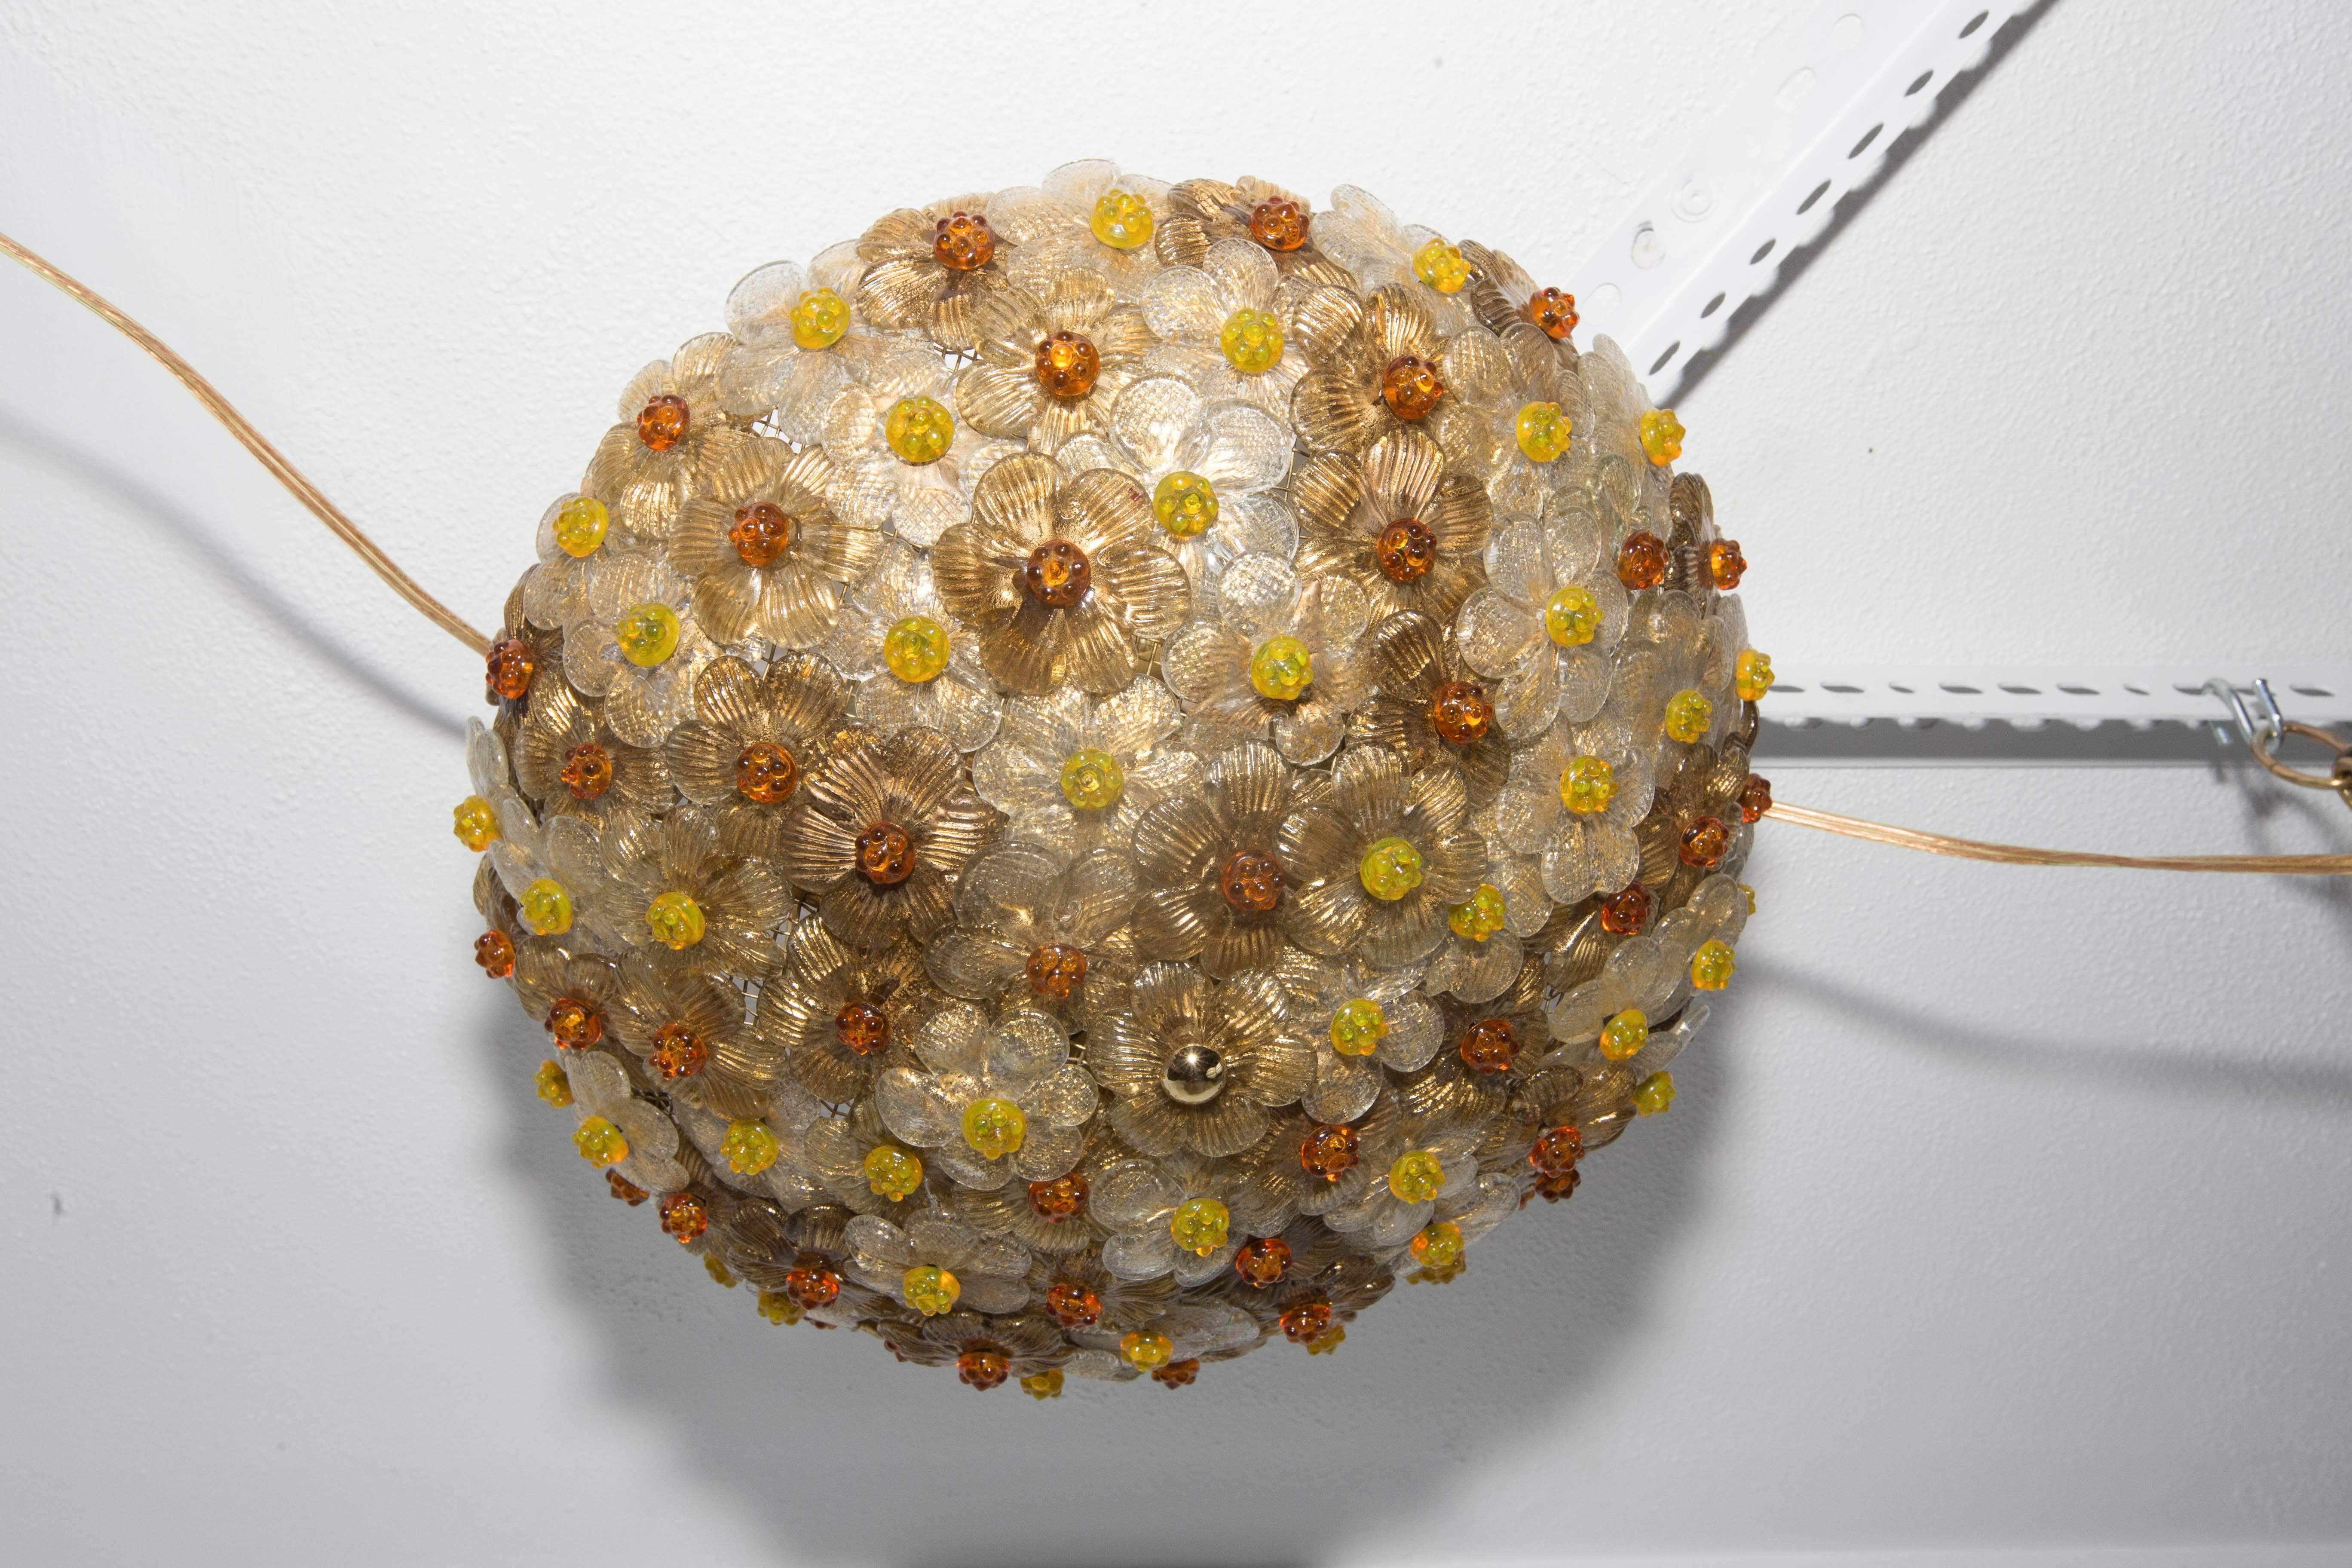 Dome form flush mount composed of multiple amber and golden glass flowers with rosette details.